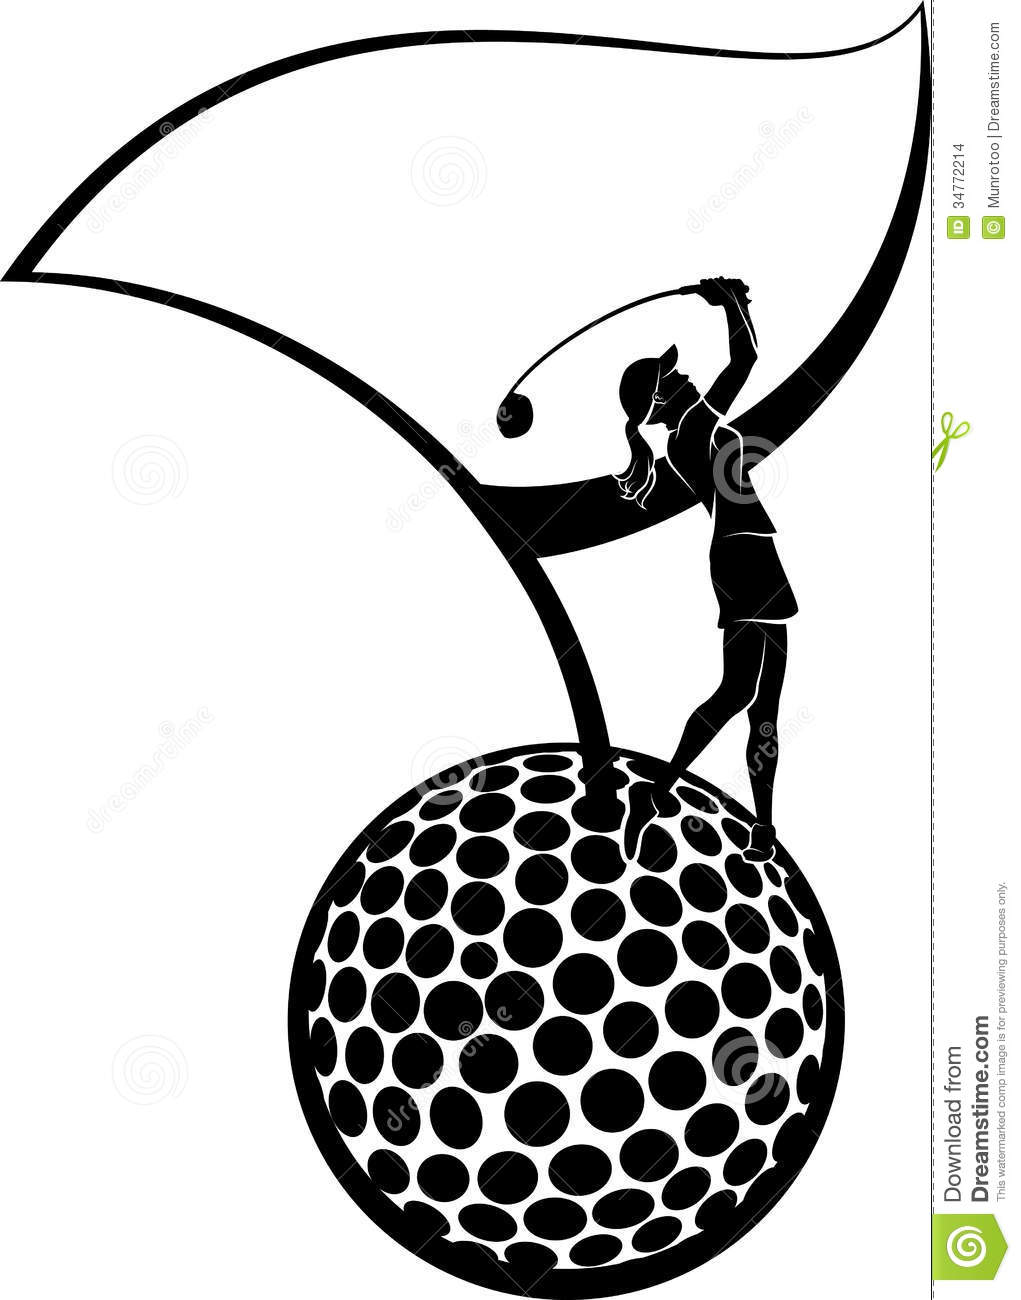 Black And White Vector Illustration Of A Young Woman Golfer On A Golf